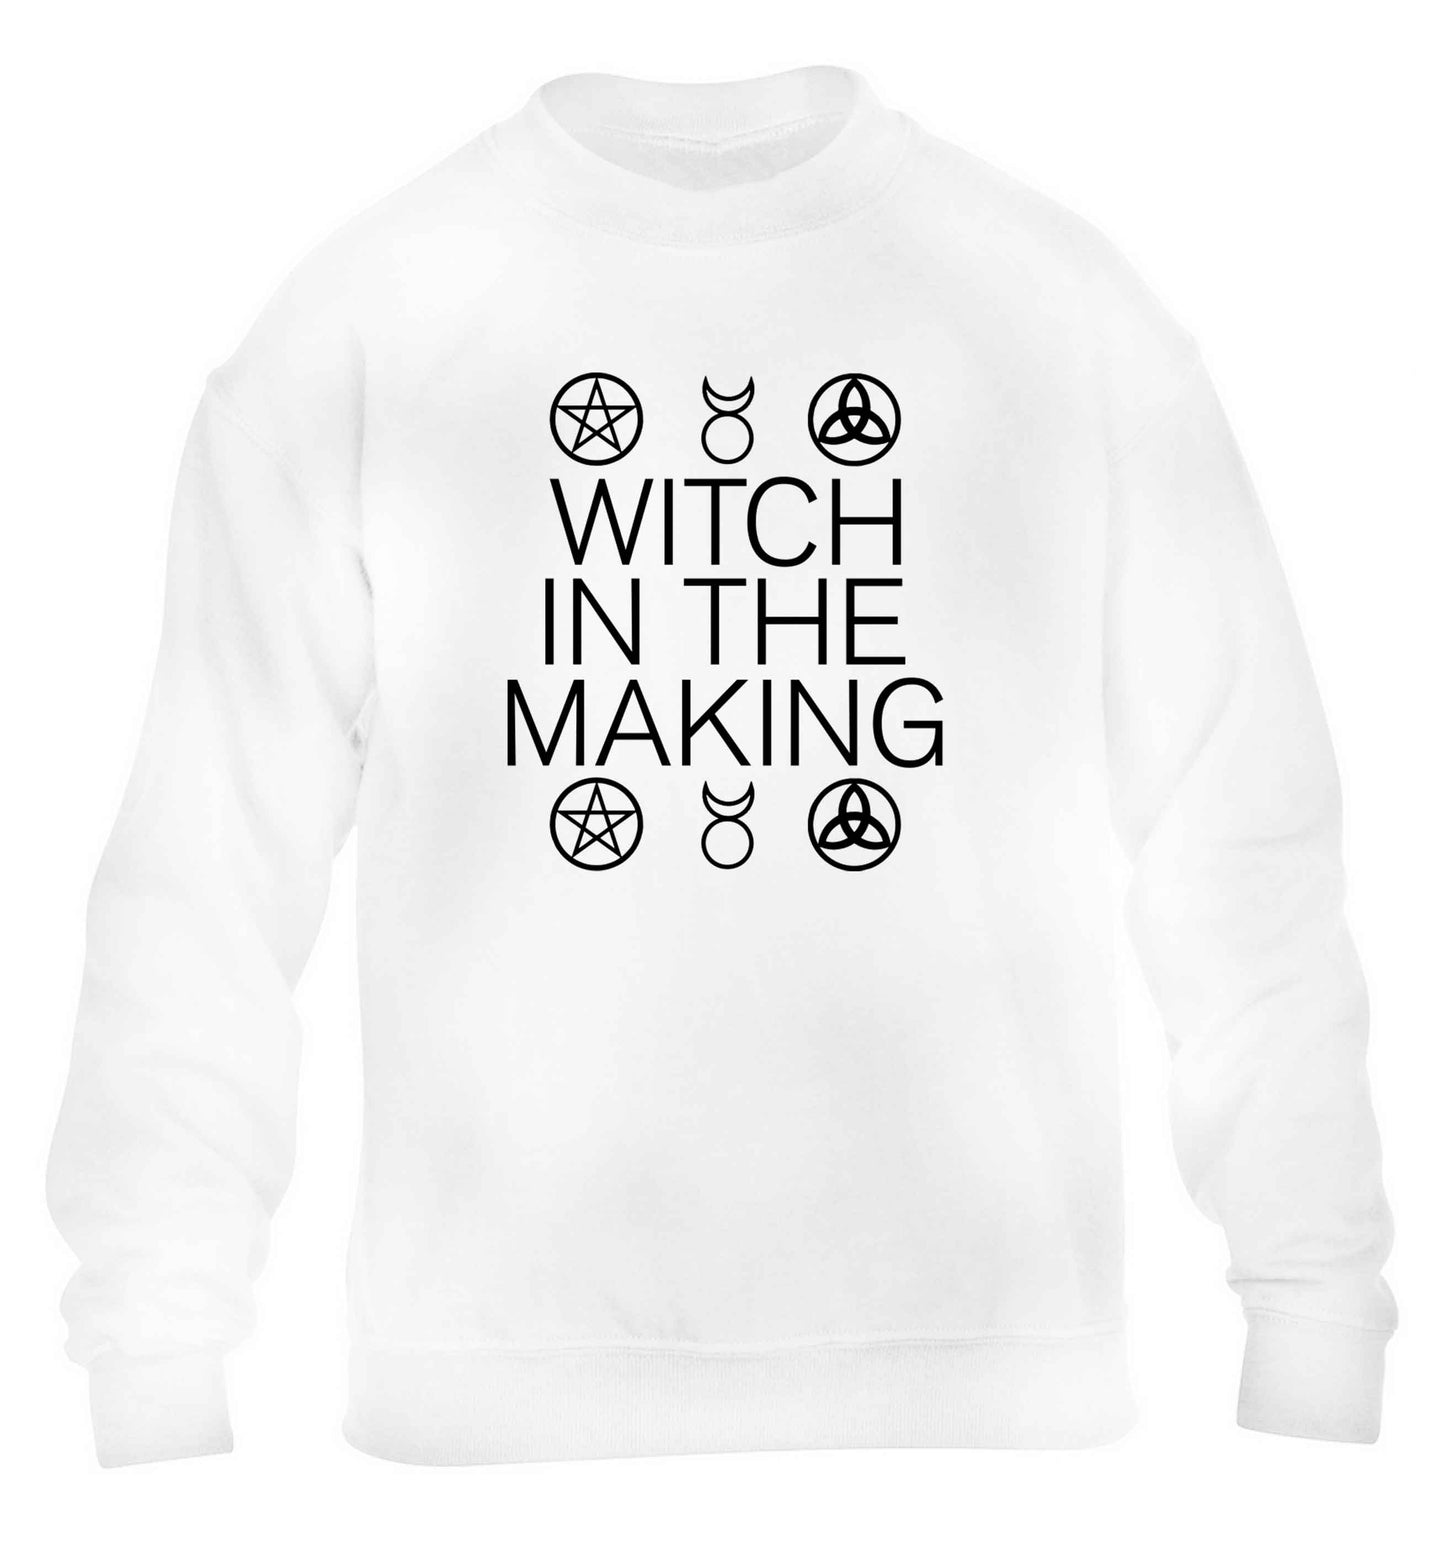 Witch in the making children's white sweater 12-13 Years